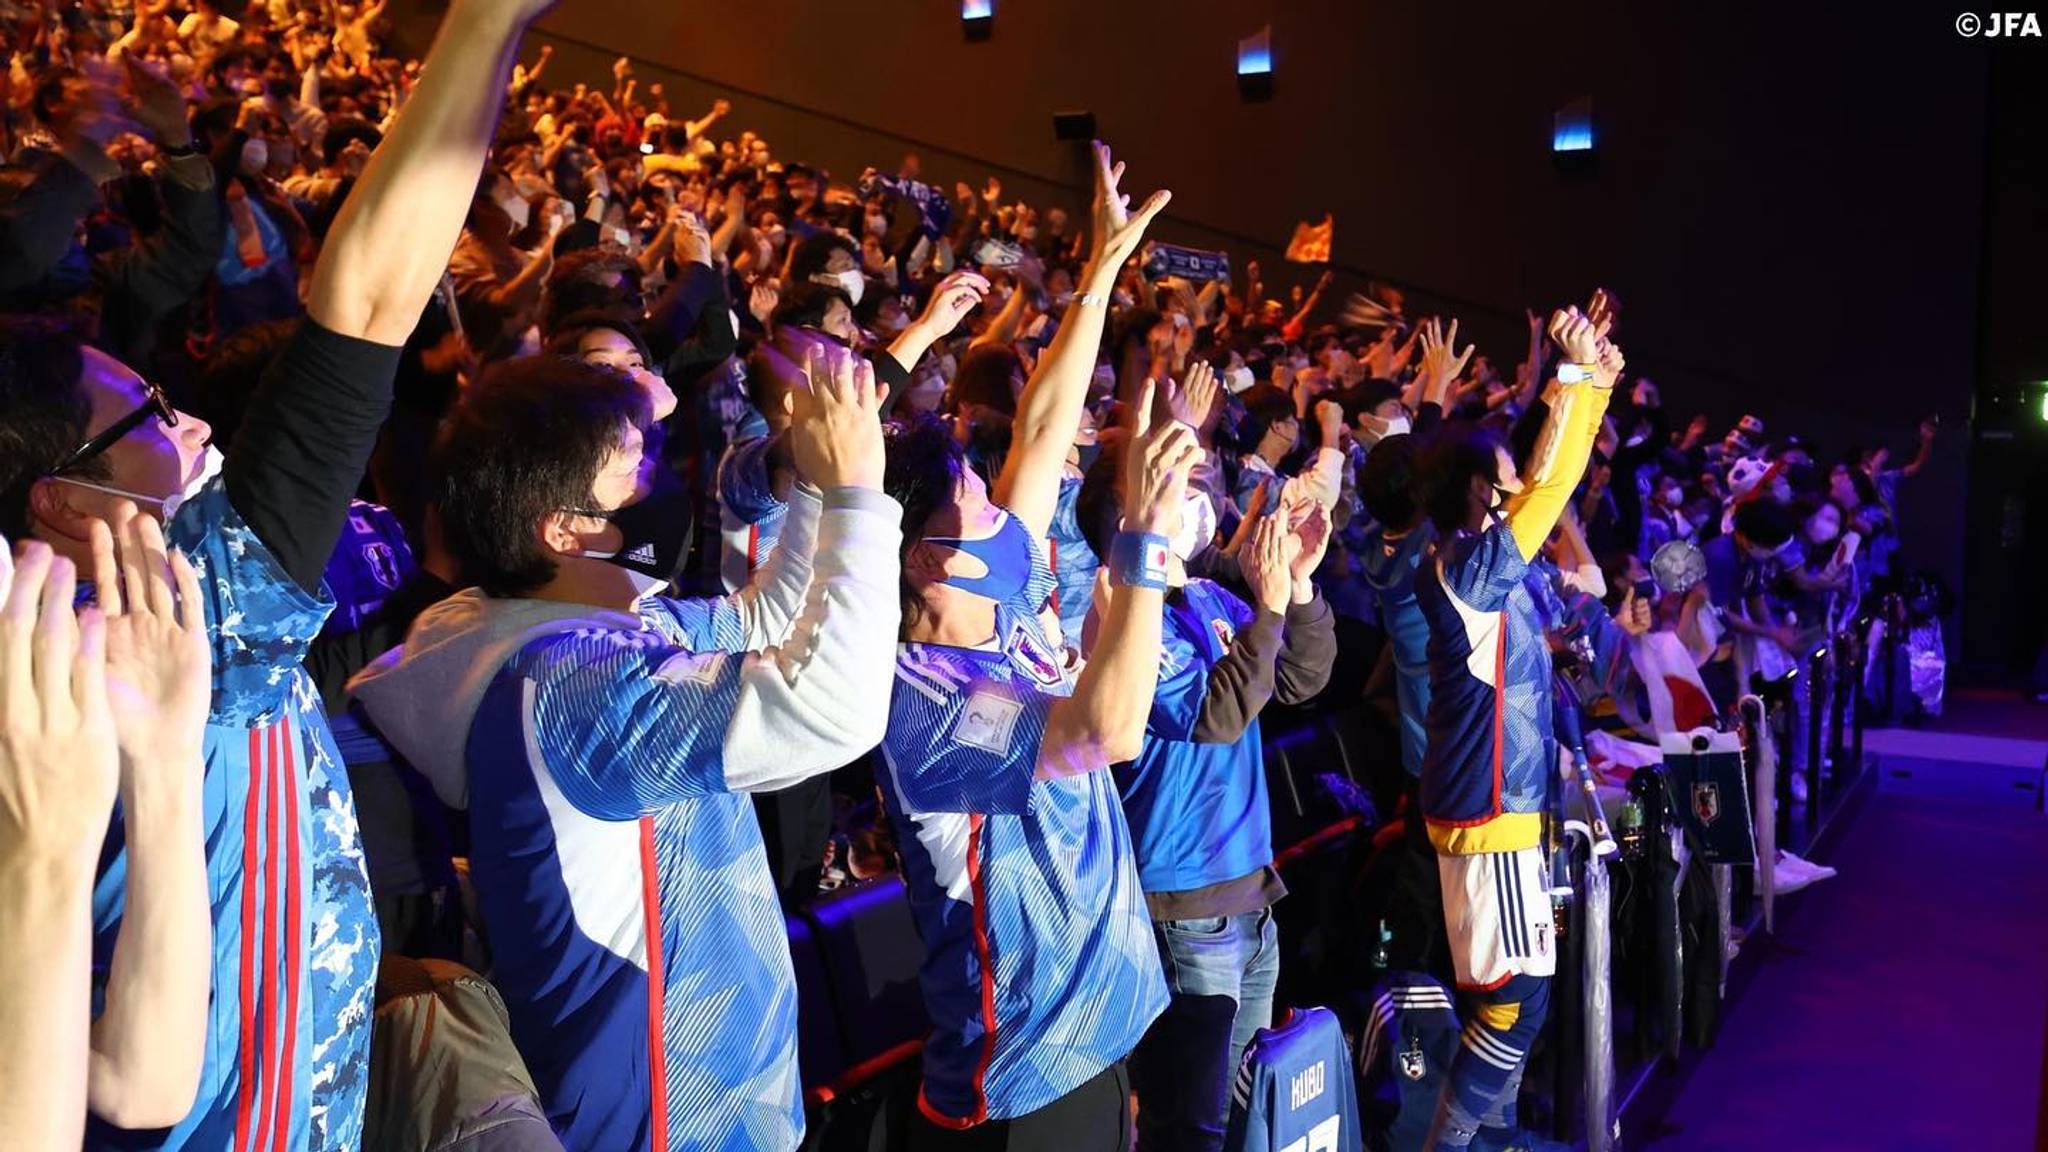 Japanese fans highlight cultural differences in Qatar